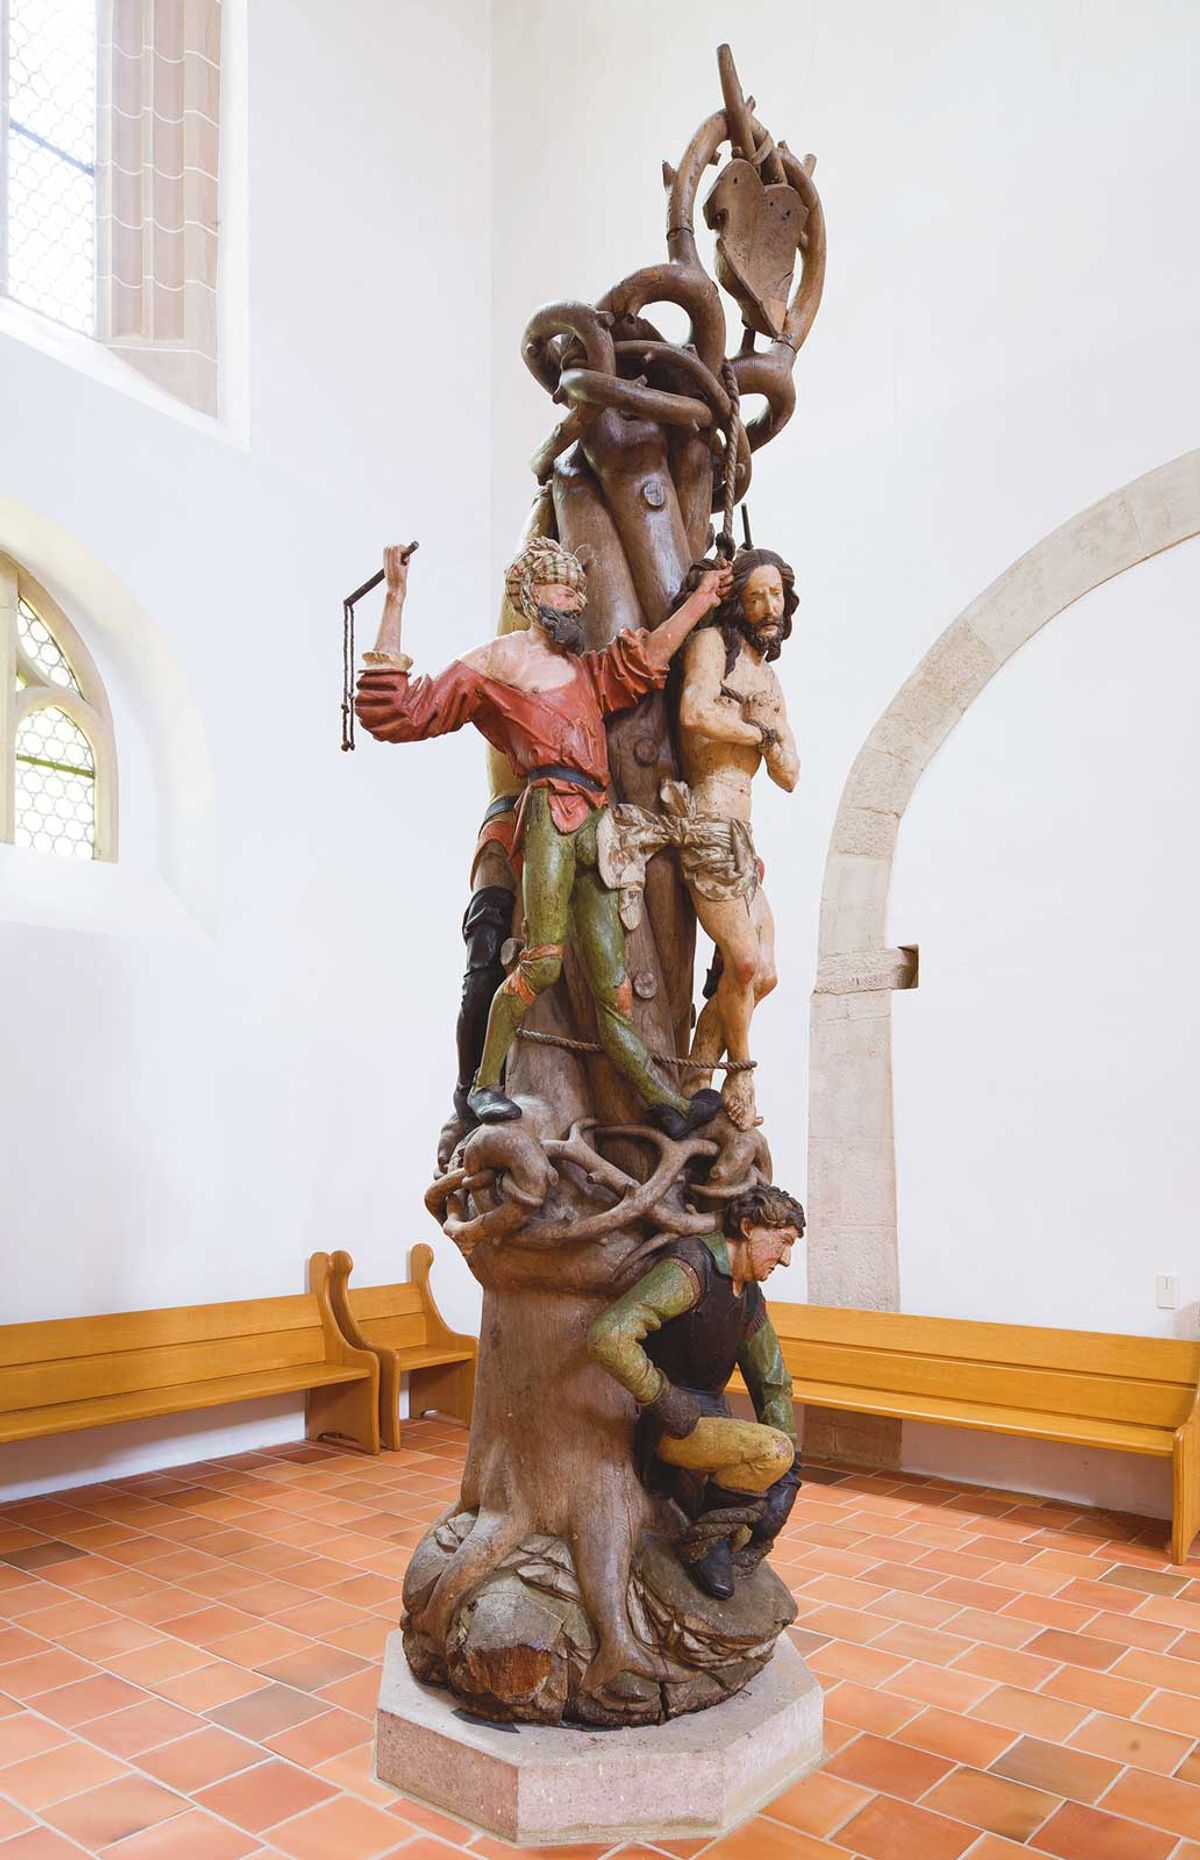 ‘Whipping Post’, polychromed oak carving (1510-22), attributed to ‘Meister H. W.’ and located in the Schlosskirche in the German city of Chemnitz

Photo: Florian Monheim/Bildarchiv Monheim


